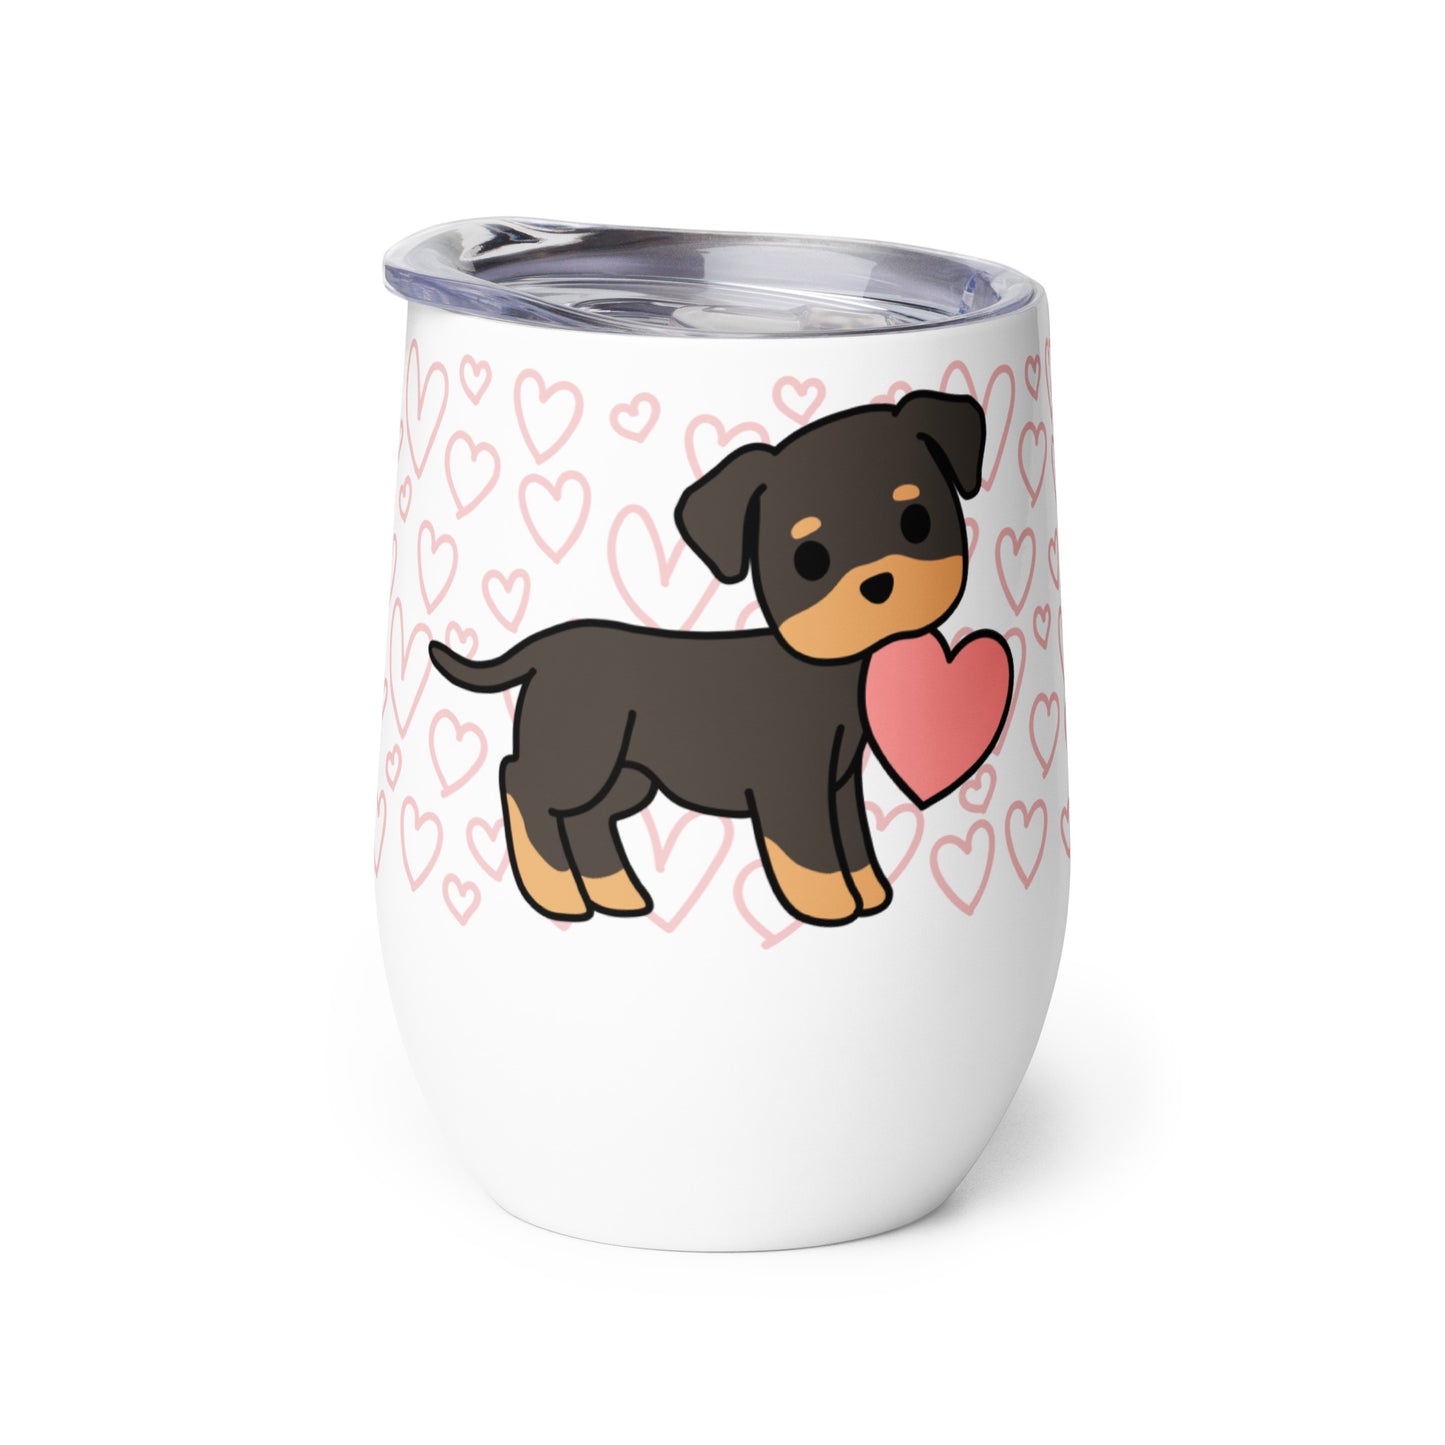 A white metal wine tumbler with a plastic lid. A pattern of hearts wraps around the top half of the tumbler. Centered on the tumbler is a cute, stylized illustration of a Rottweiler.